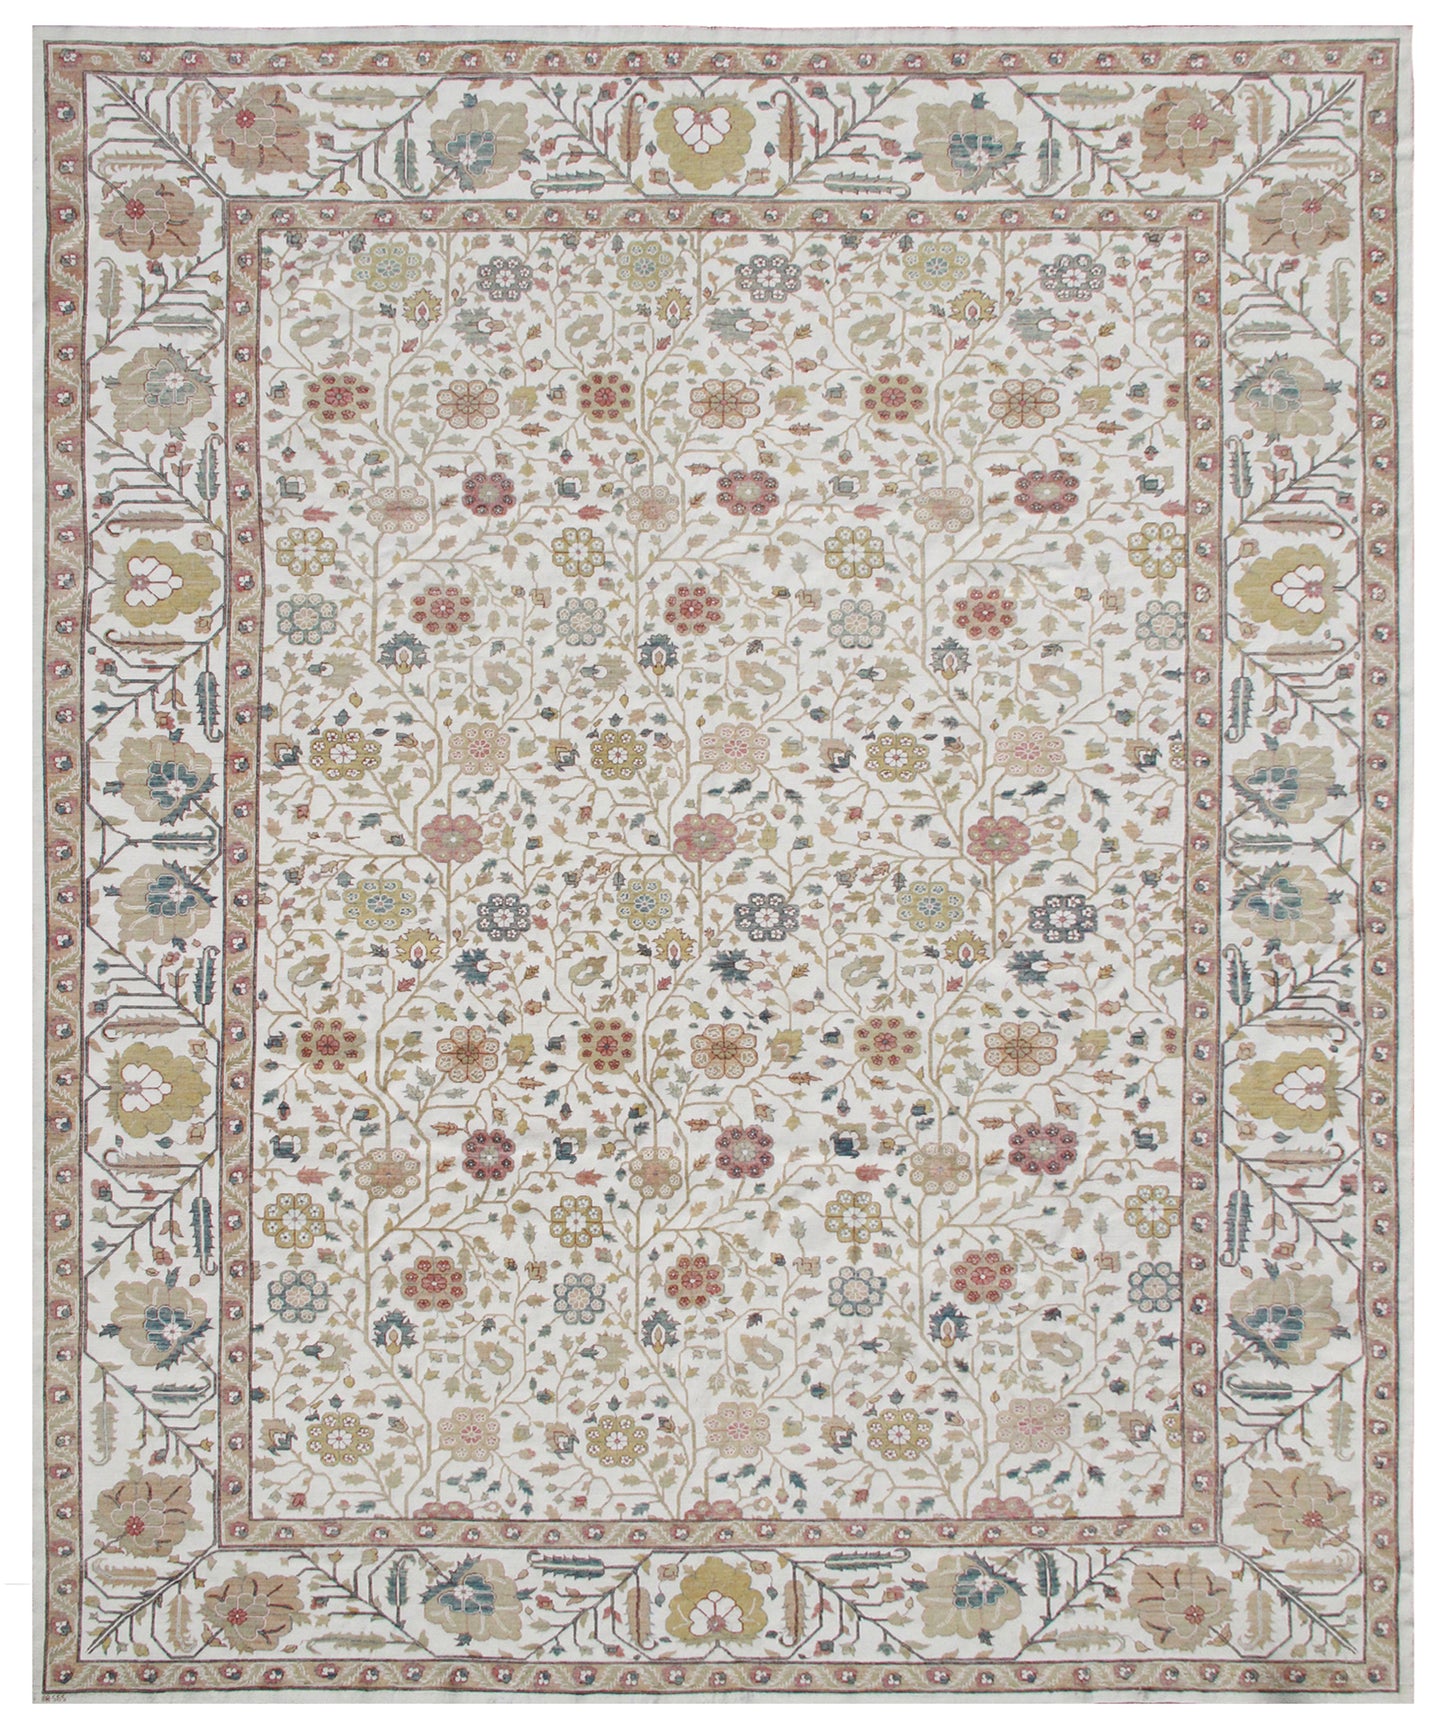 10x14 Fine Cotton And Wool Ariana Traditional Rug